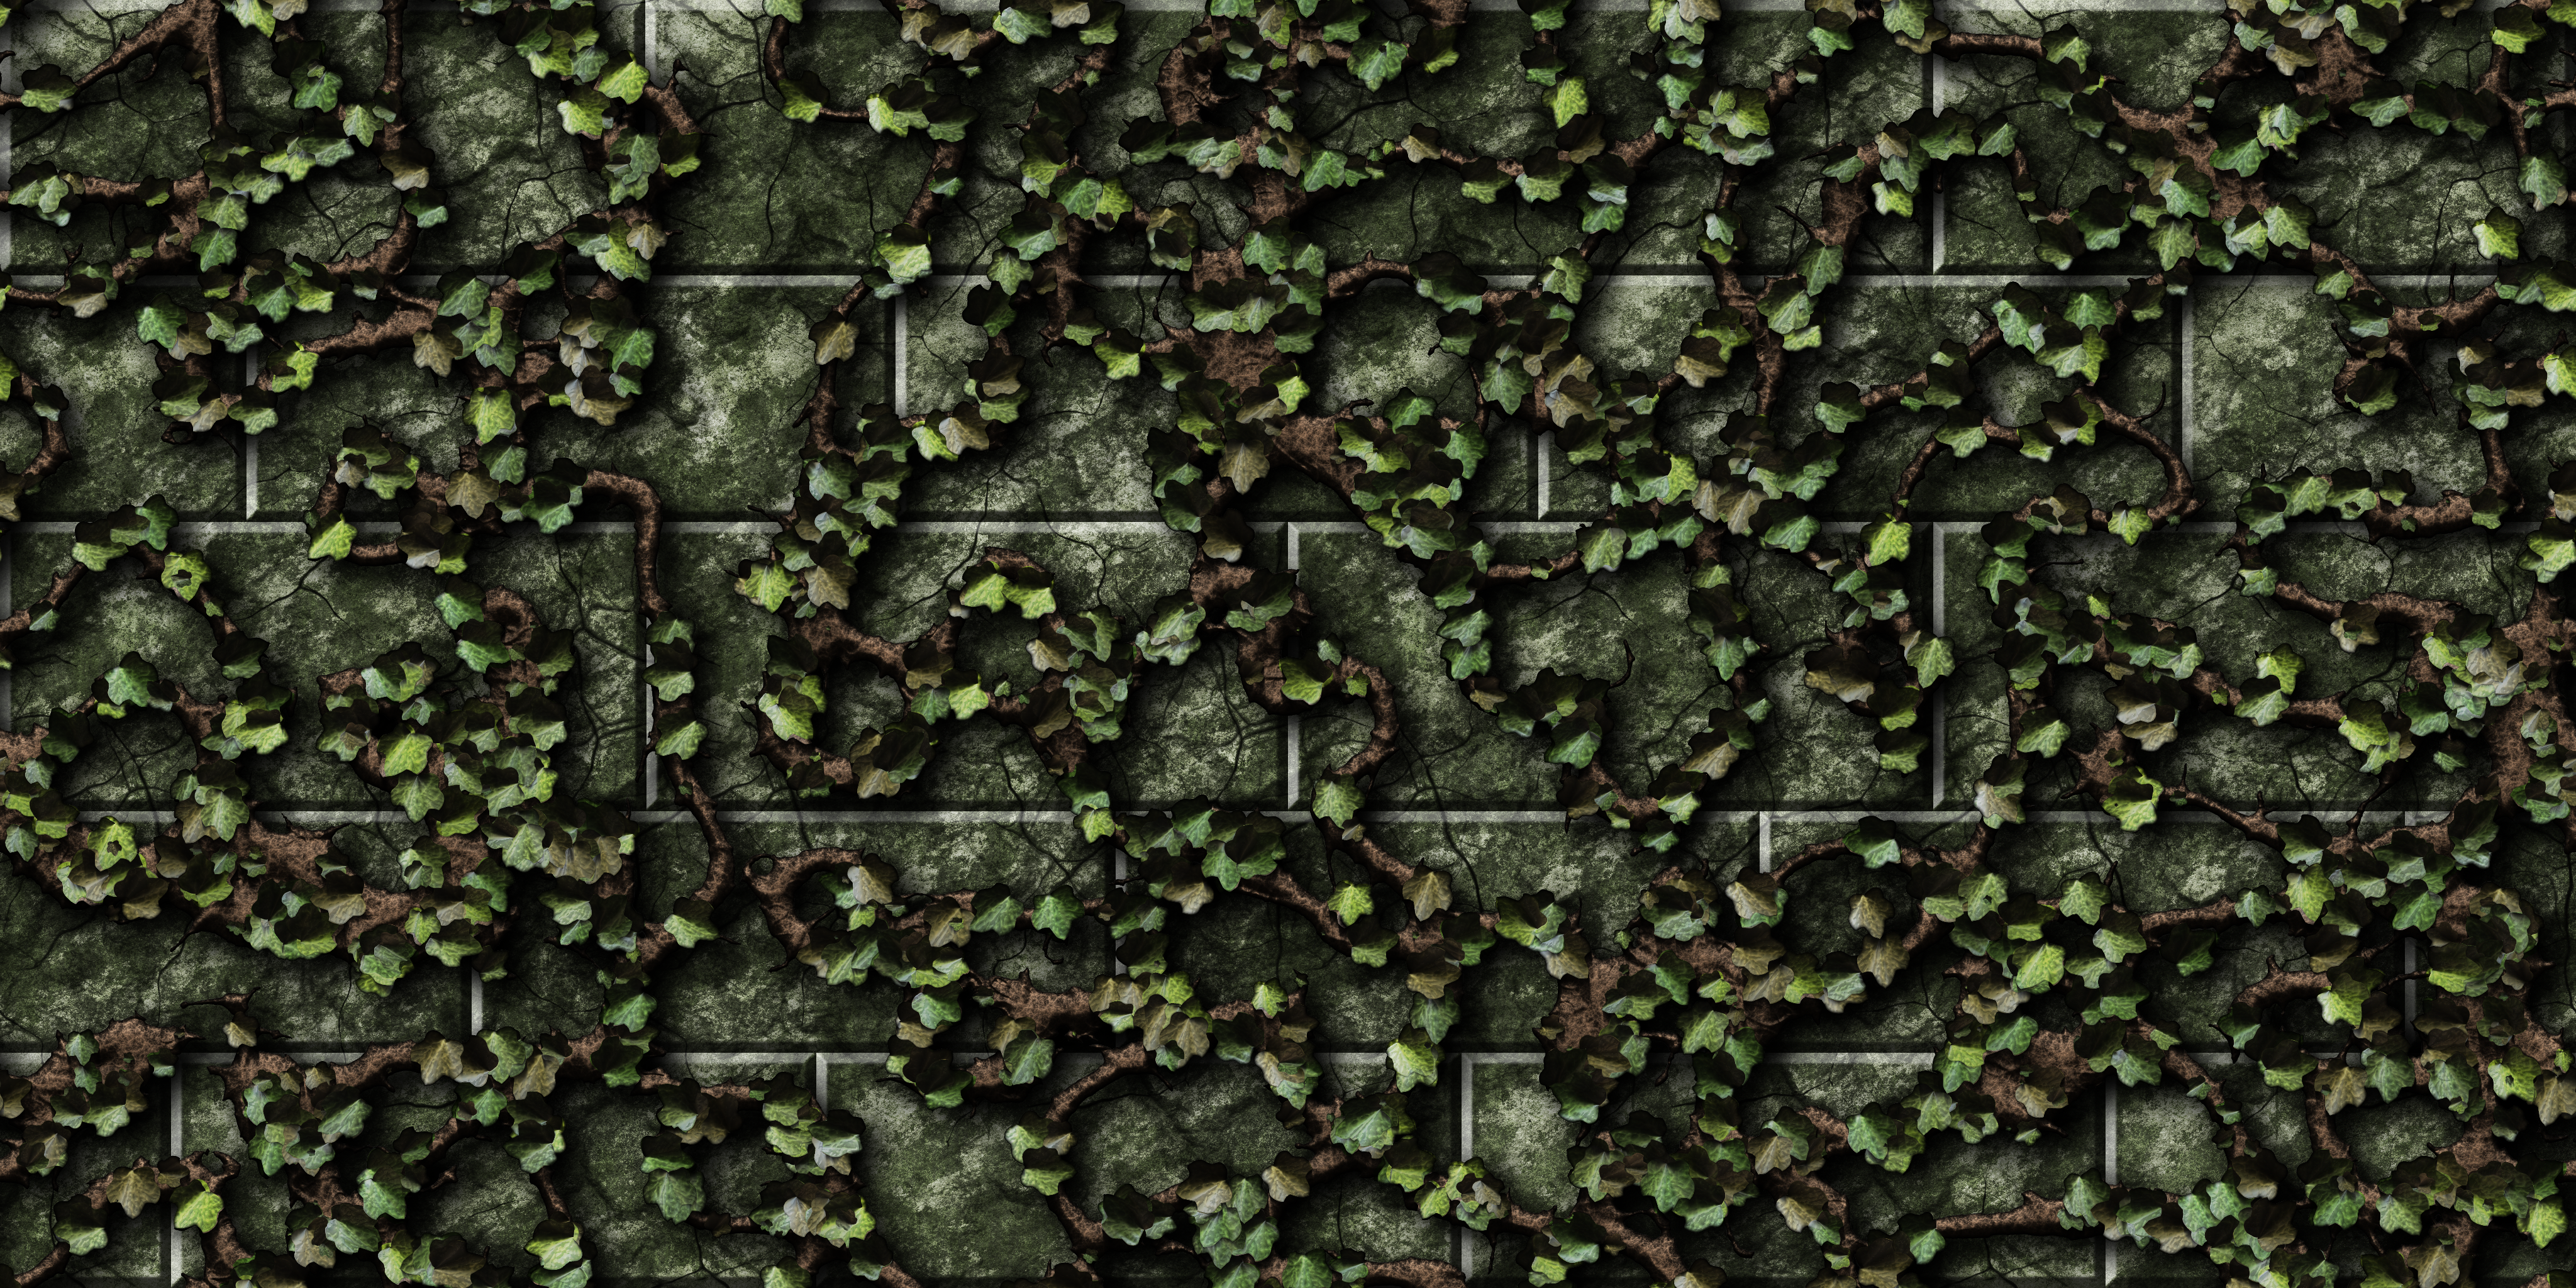 green_bricks_with_vines_01_by_hoover1979-dbavnji.png